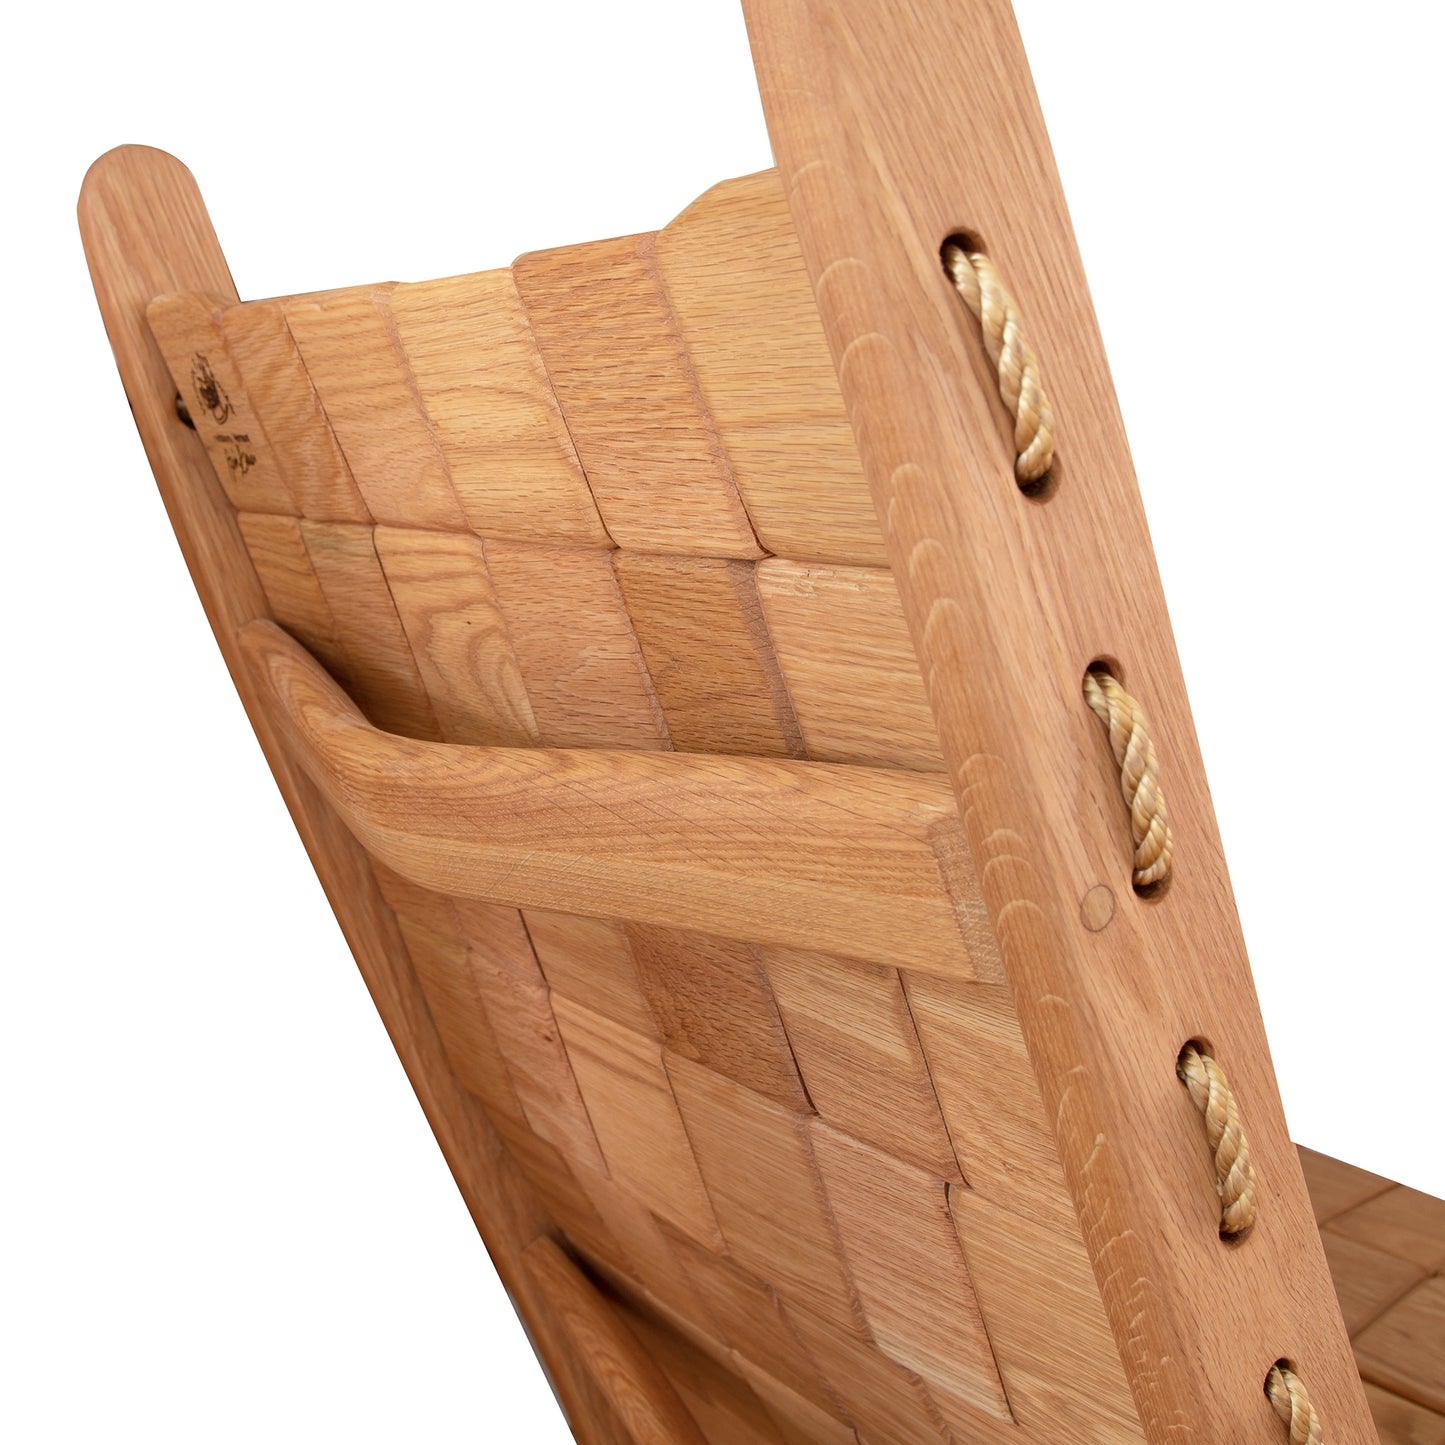 Close-up of a Vermont Folk Rocker Quilted Vermont Oak Rocking Chair showing detailed craftsmanship, with visible wood grains and rope joints. The focus is on the curved wooden slats and the secured rope ties.